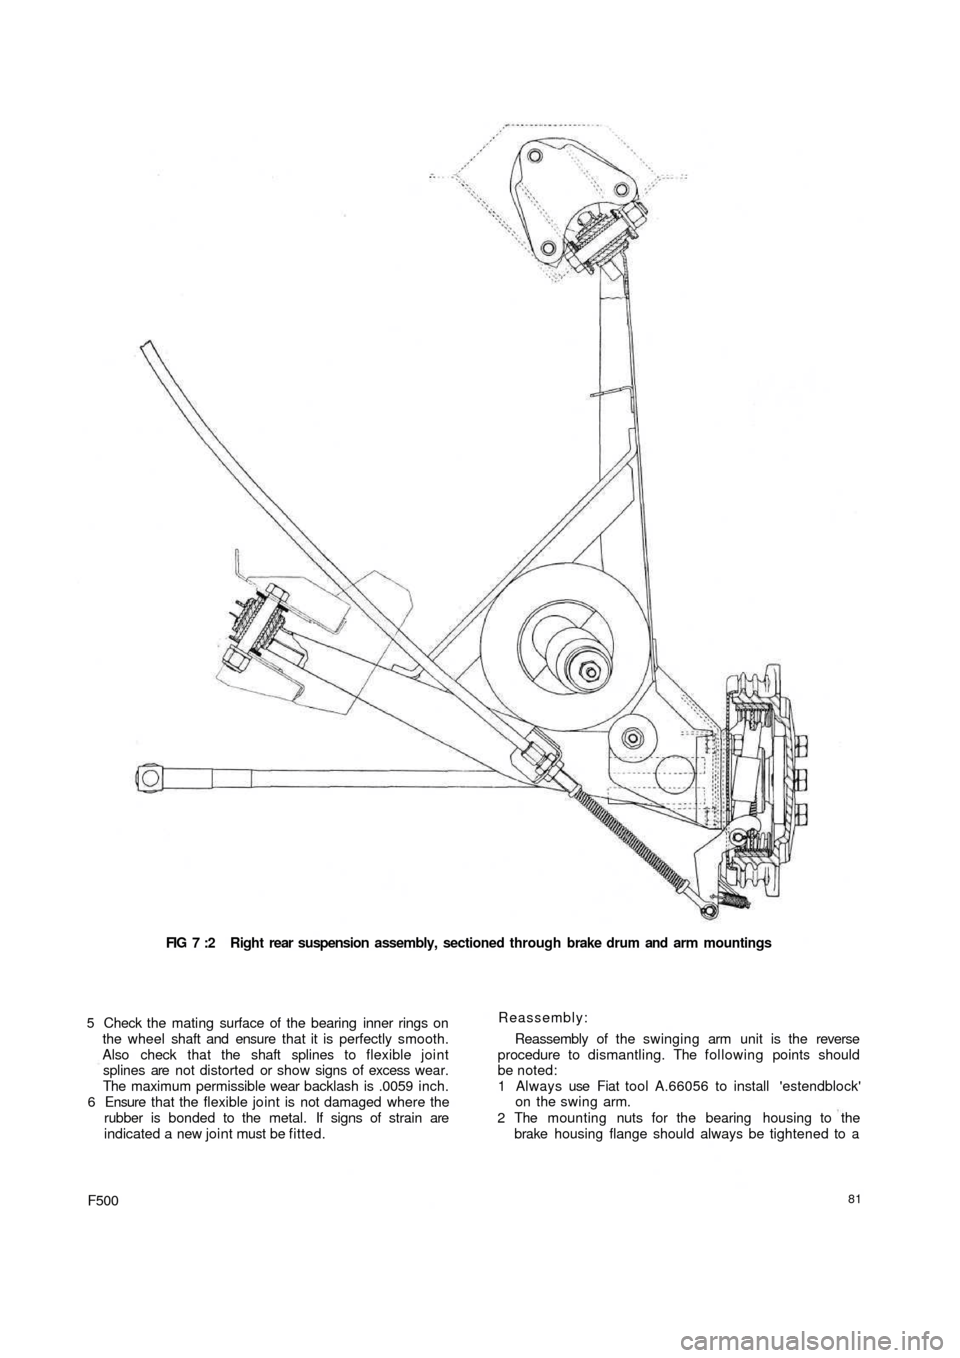 FIAT 500 1973 1.G Workshop Manual FIG 7 :2  Right rear suspension  assembly, sectioned through brake drum and arm mountings
5 Check the mating surface of the bearing inner rings on
the wheel shaft and ensure that it is perfectly smoot